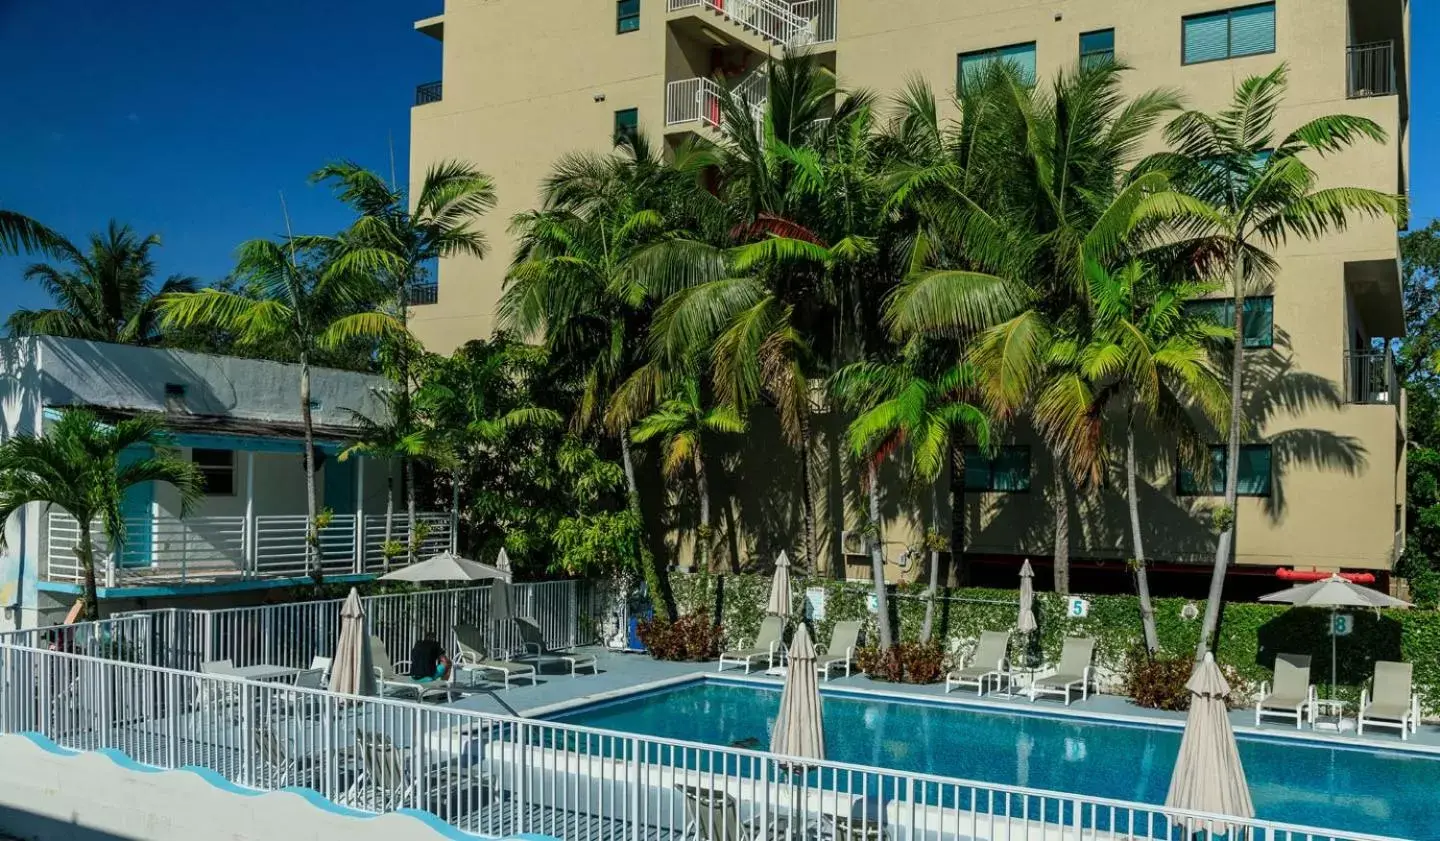 Property building, Swimming Pool in The New Yorker Miami Hotel